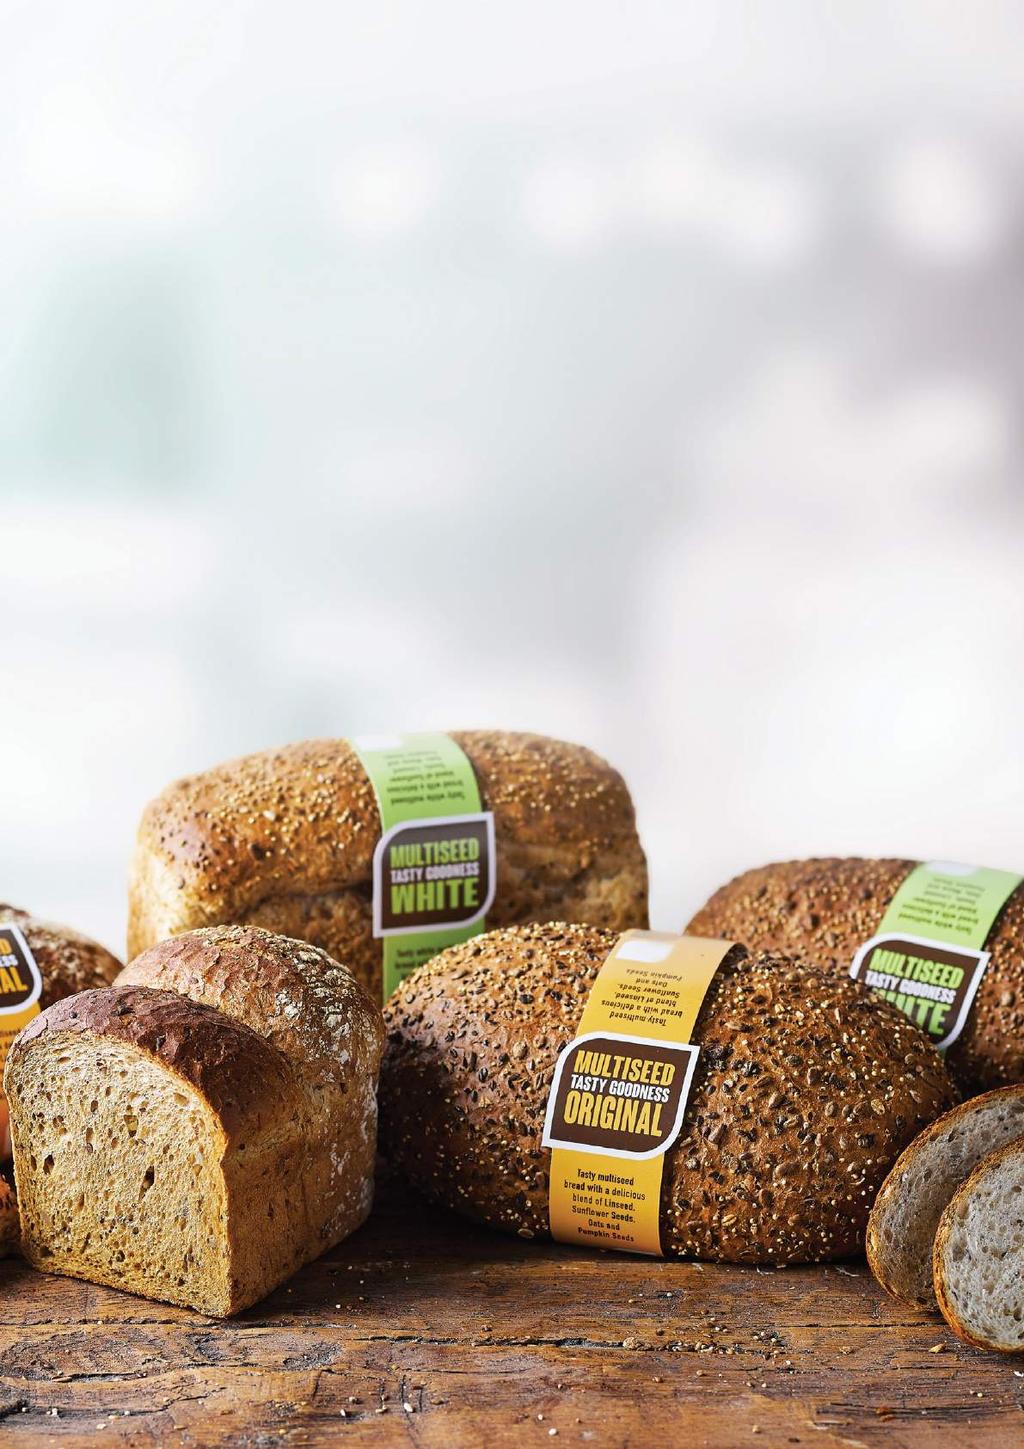 Tasty multiseed bread with a delicious combination of sunflower seeds, linseed, pumpkin seeds and oats.